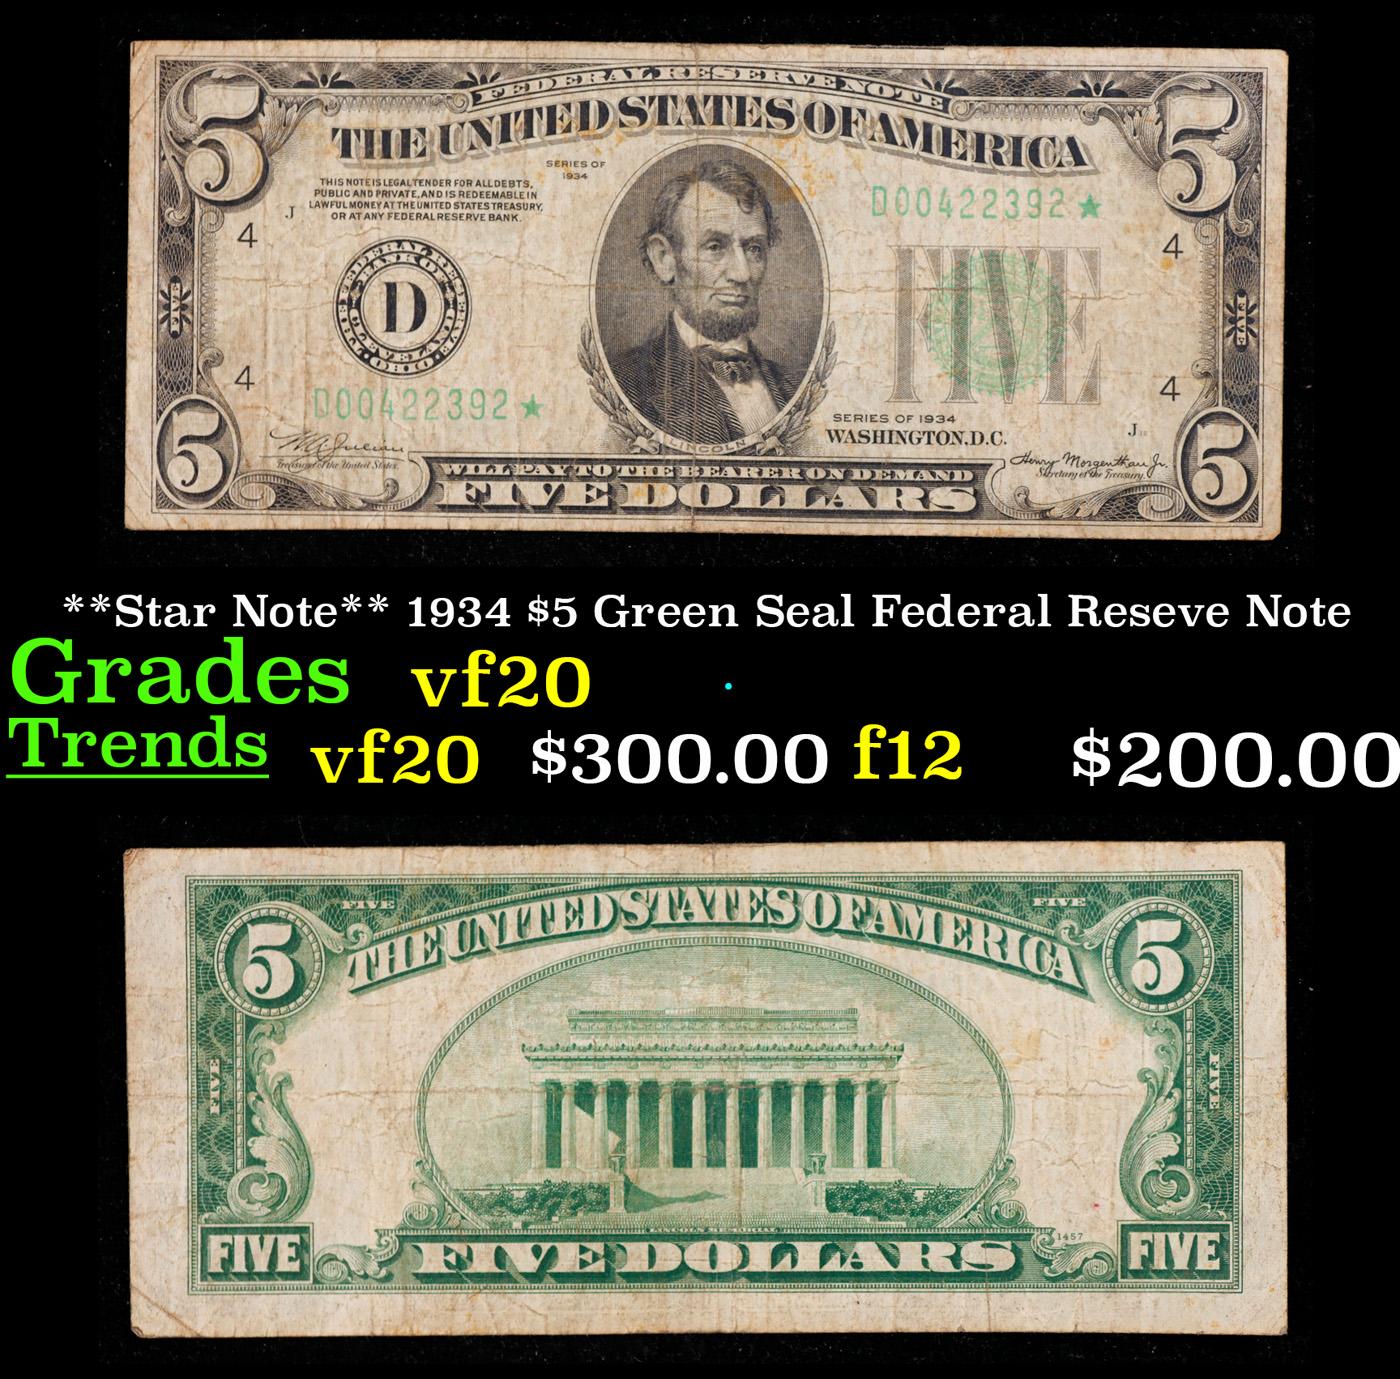 **Star Note** 1934 $5 Green Seal Federal Reseve Note Grades vf, very fine